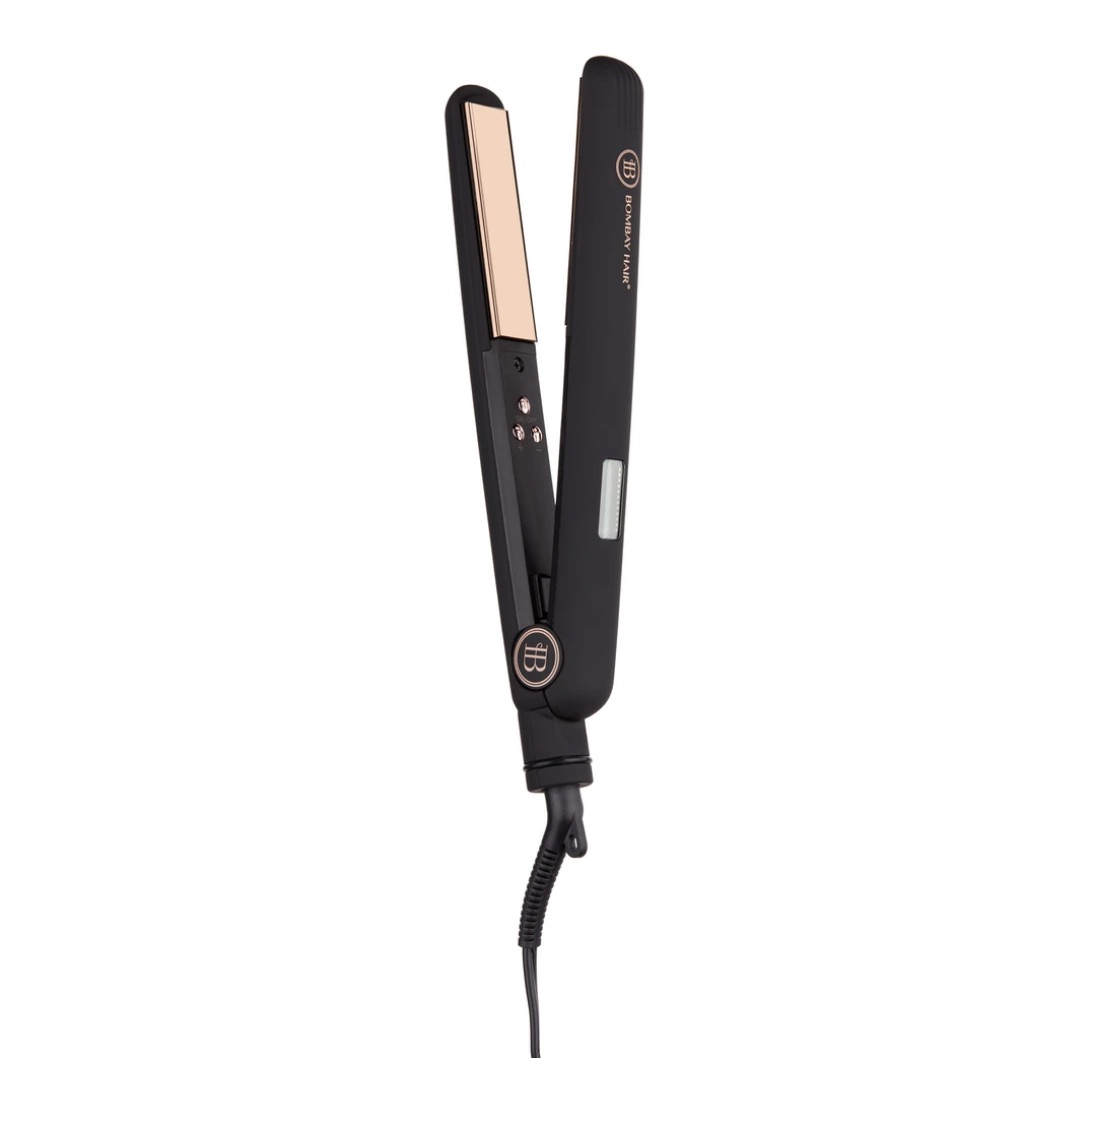 Pro Hair Styling Tools